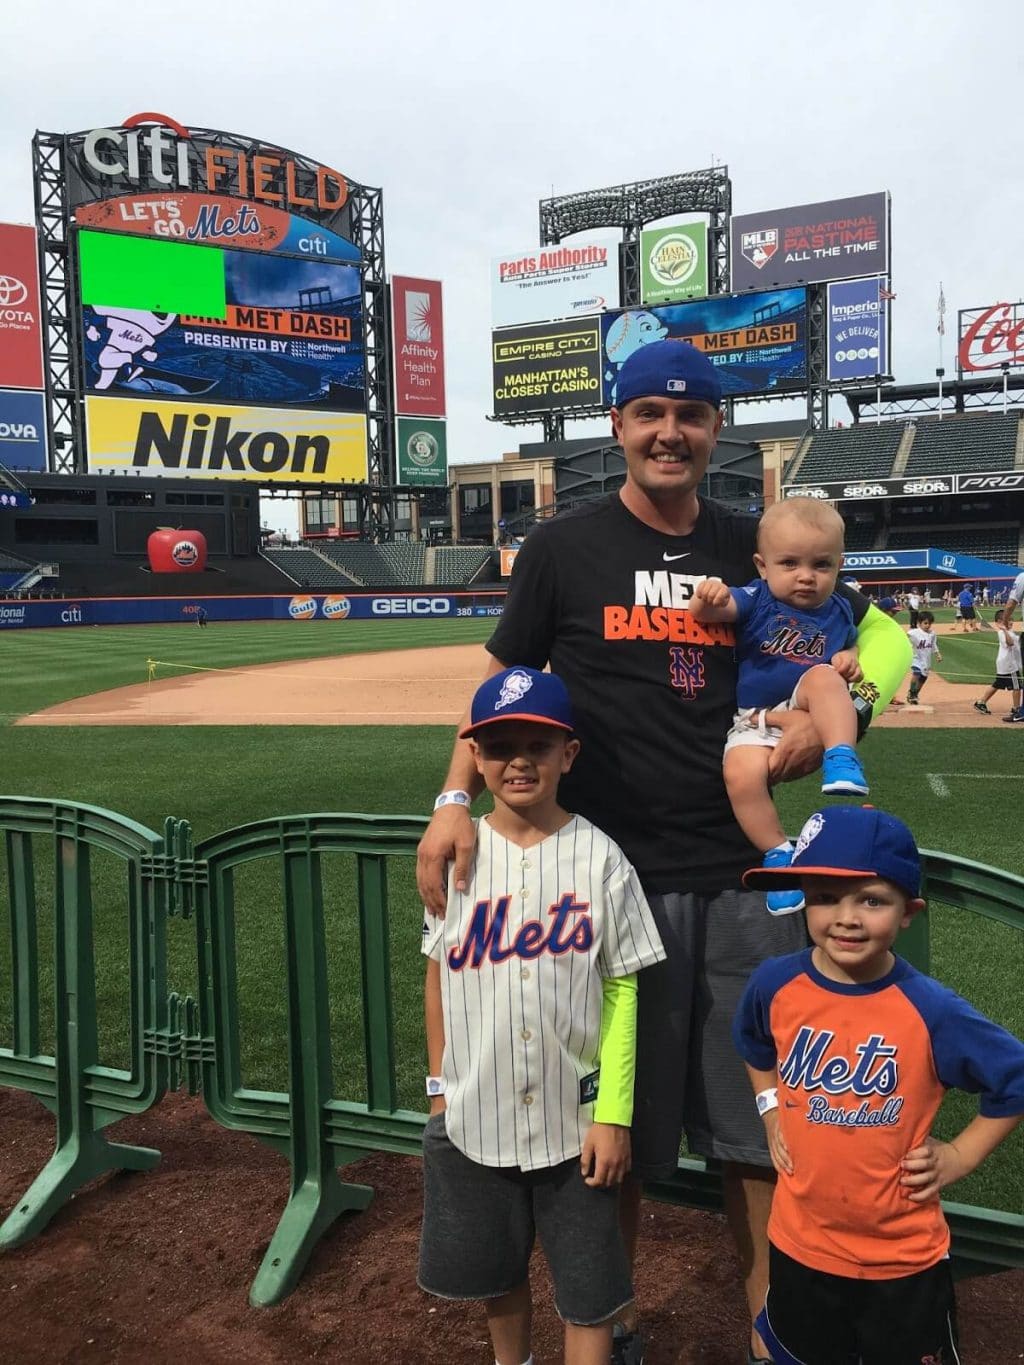 Mets Citi Field with kids run the bases Sunday